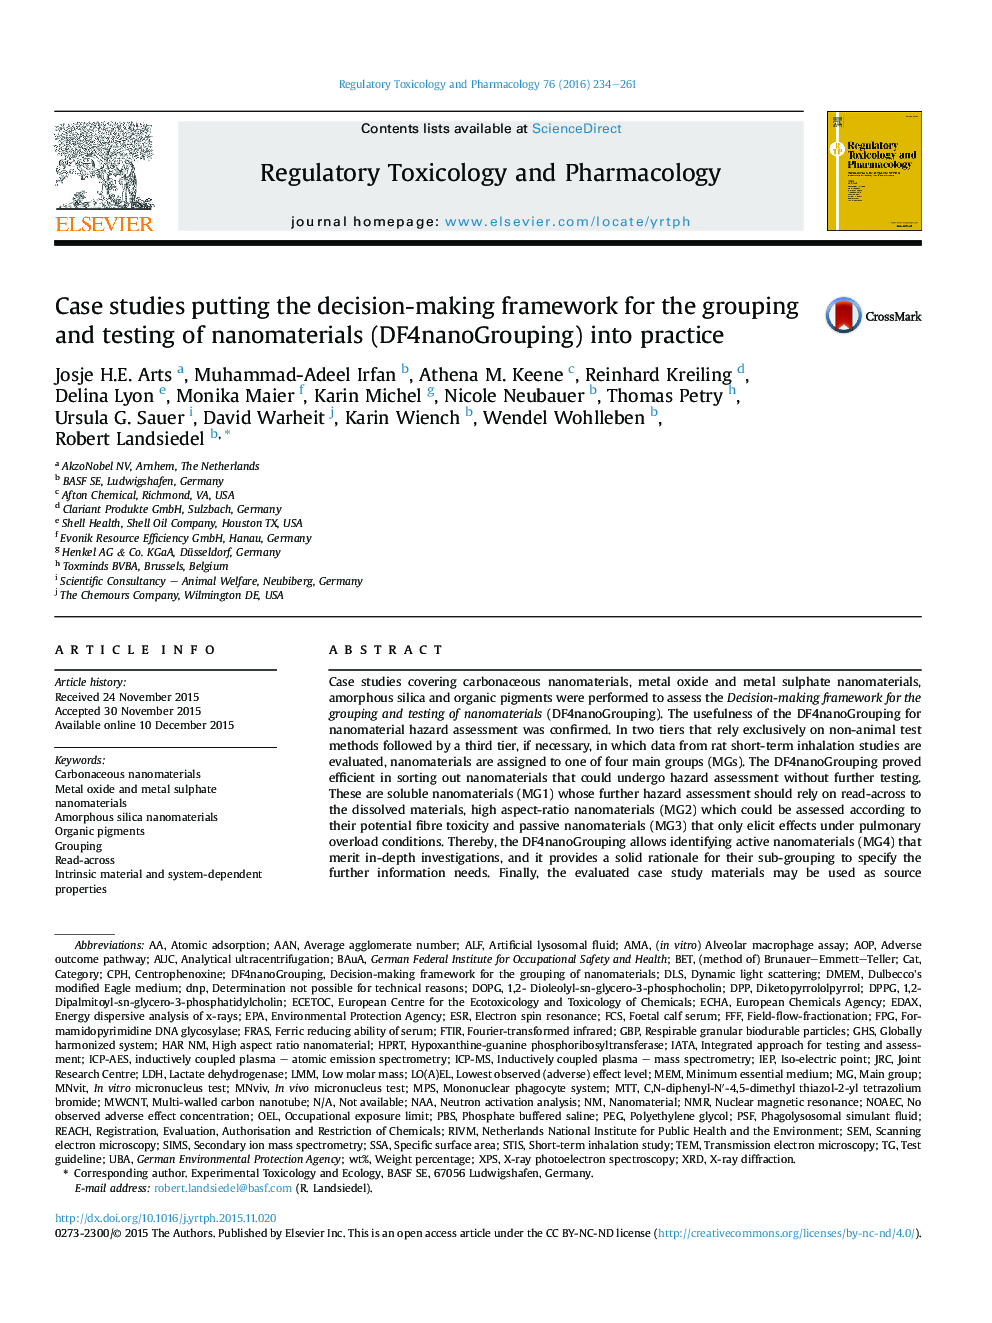 Case studies putting the decision-making framework for the grouping and testing of nanomaterials (DF4nanoGrouping) into practice